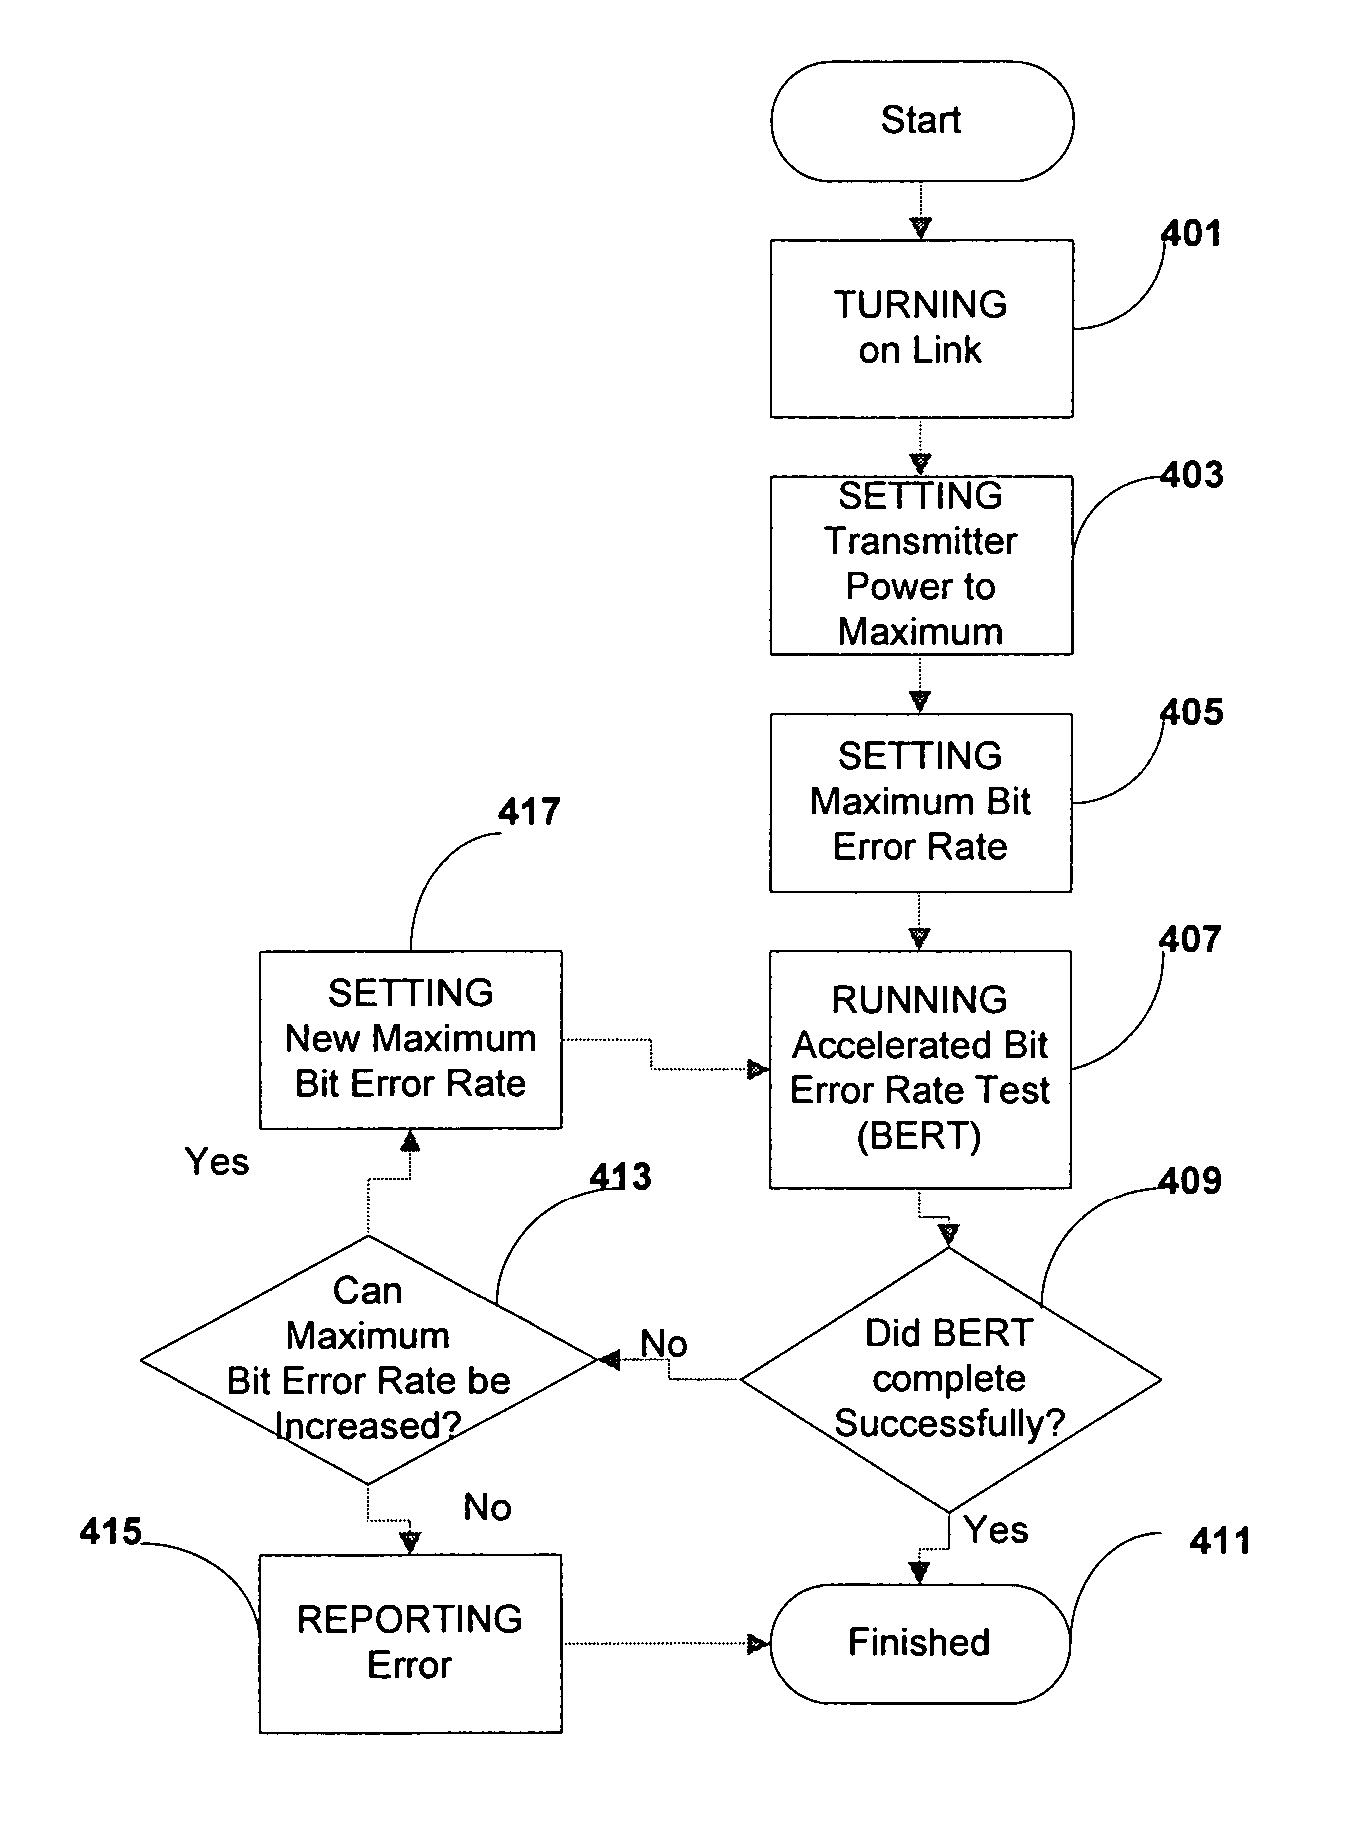 Apparatus and method for transmitting and receiving high-speed differential current data between circuit devices